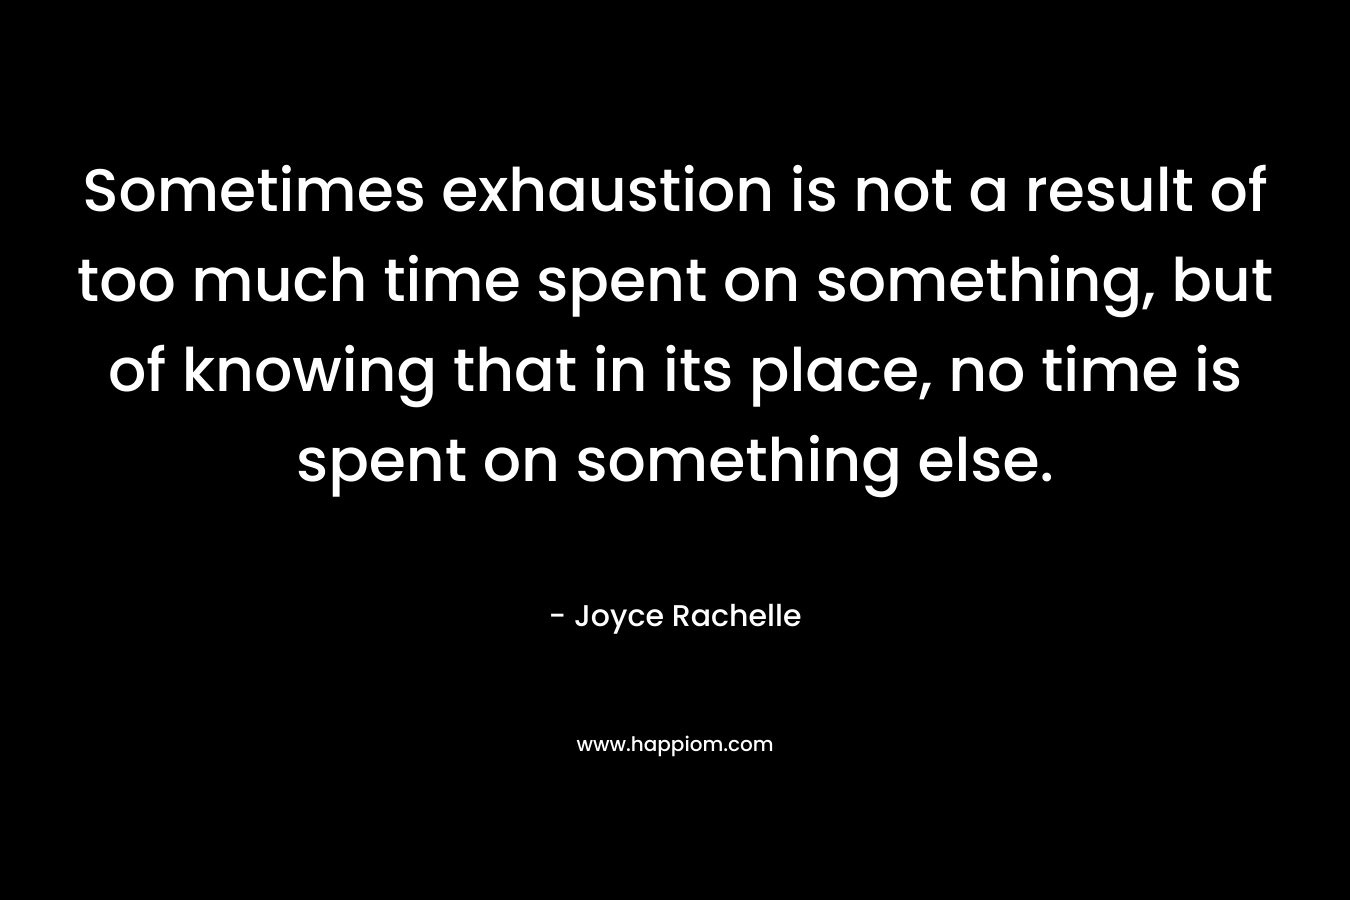 Sometimes exhaustion is not a result of too much time spent on something, but of knowing that in its place, no time is spent on something else.